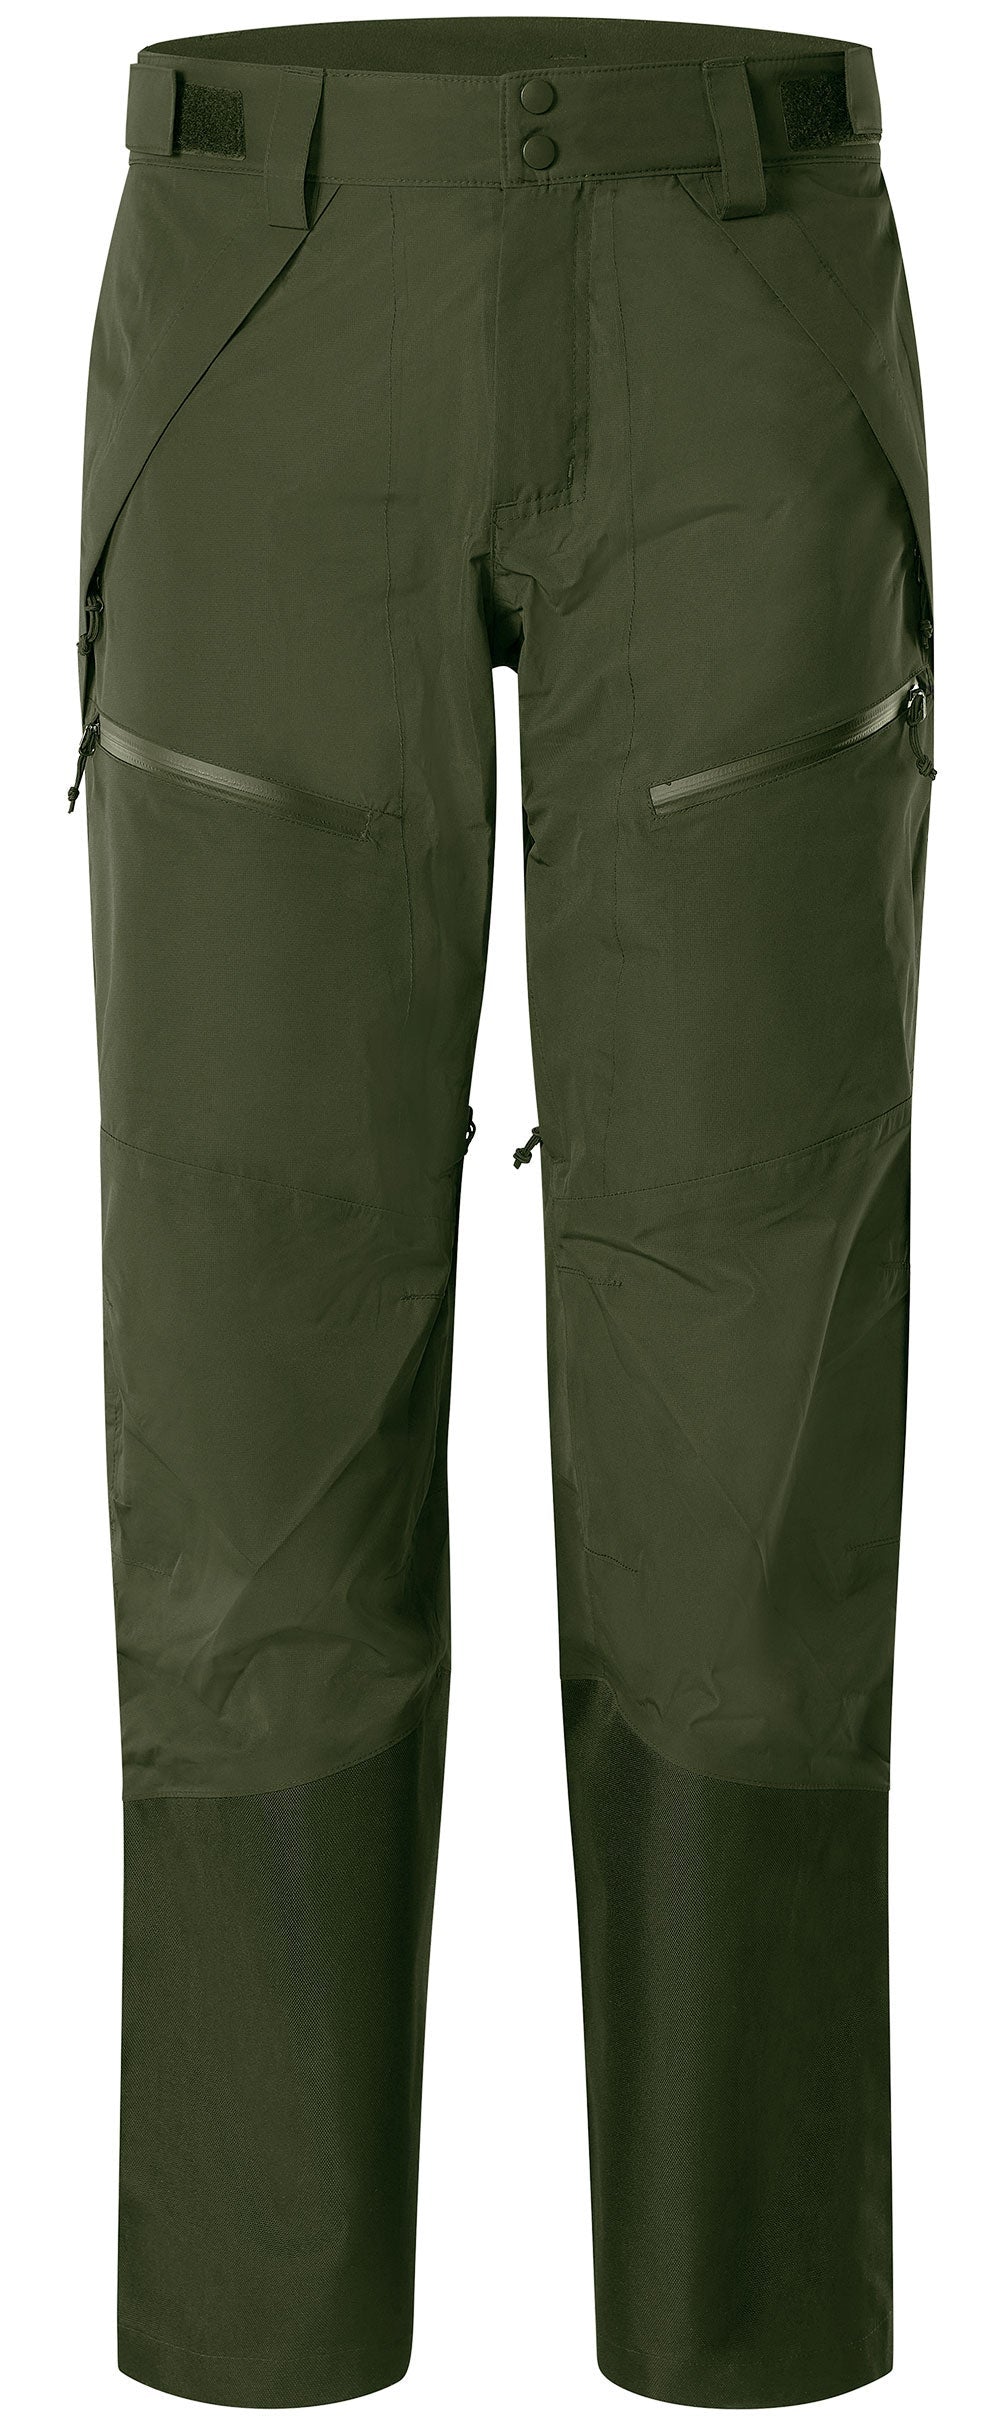 Fully Taped Seams Pant: Ensures maximum protection from the elements.